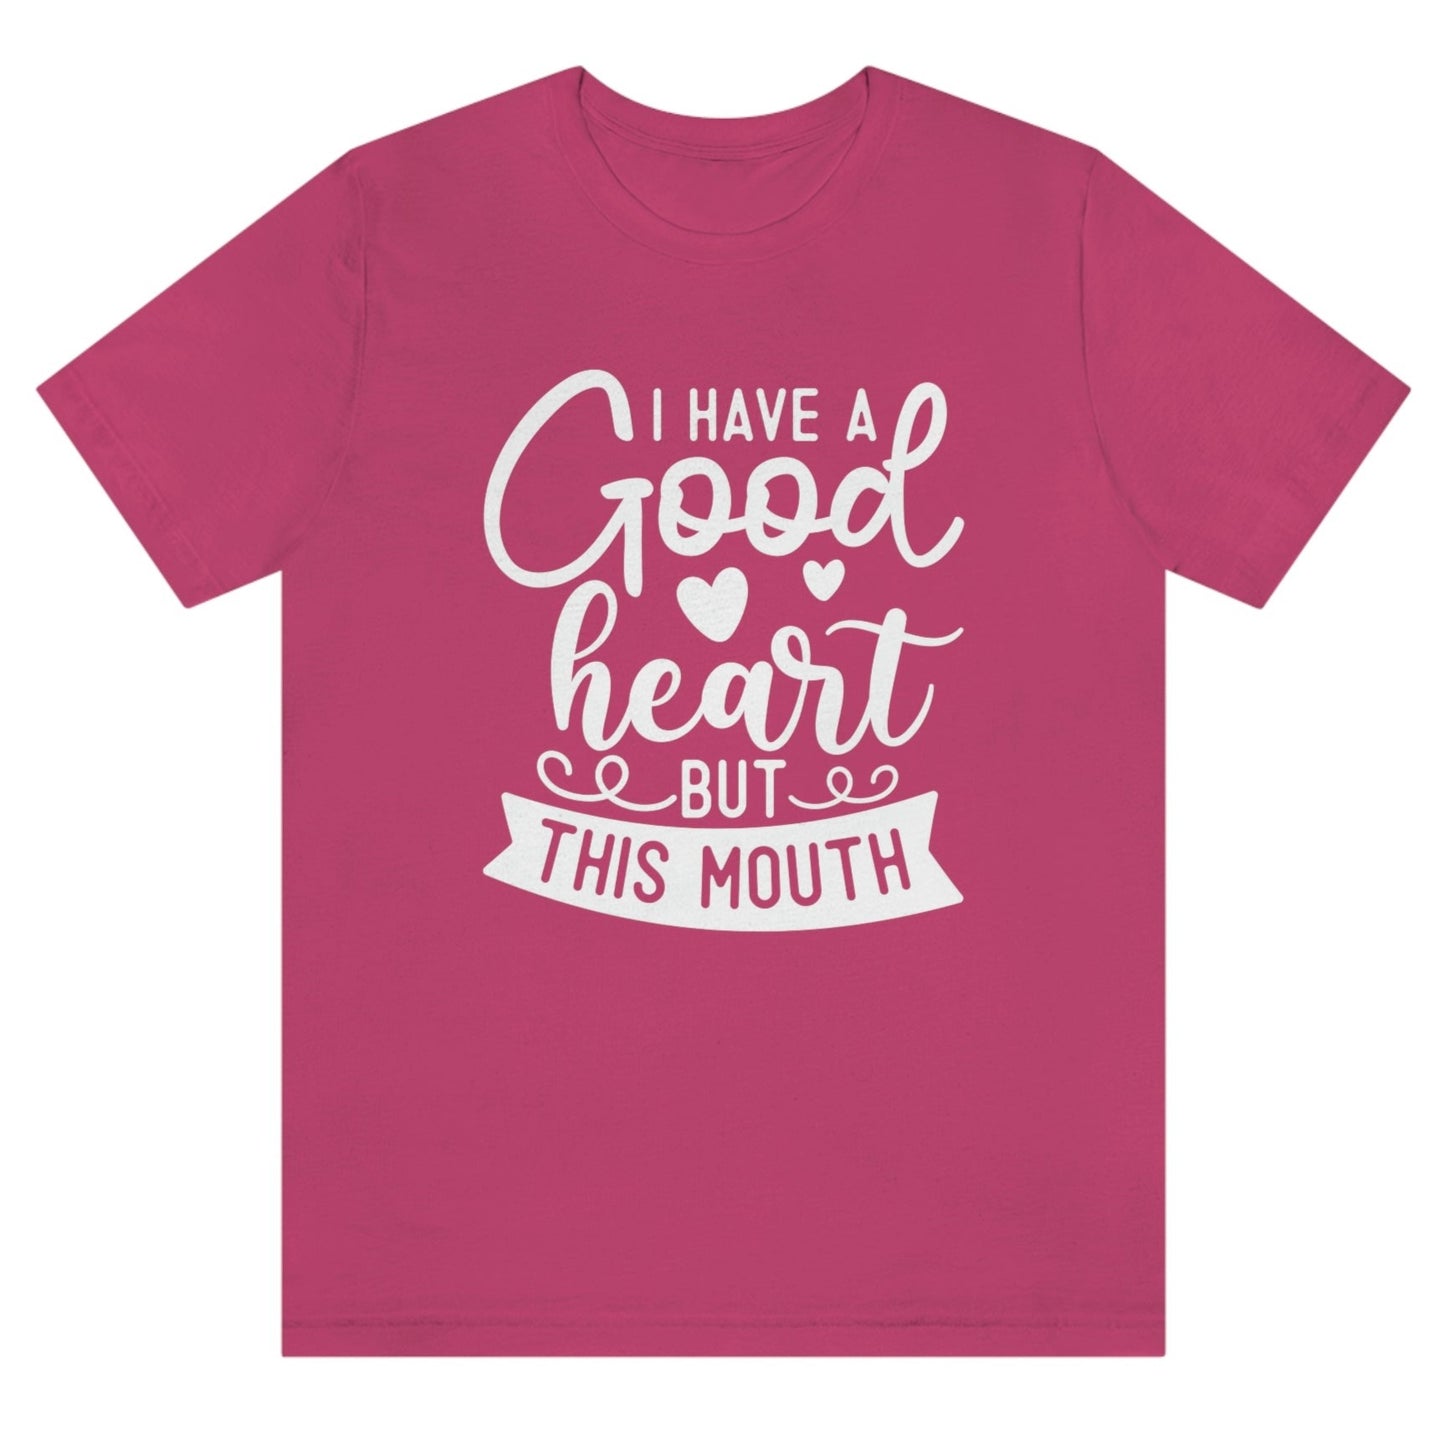 i-have-a-good-heart-but-this-mouth-berry-t-shirt-women-sarcastic-funny